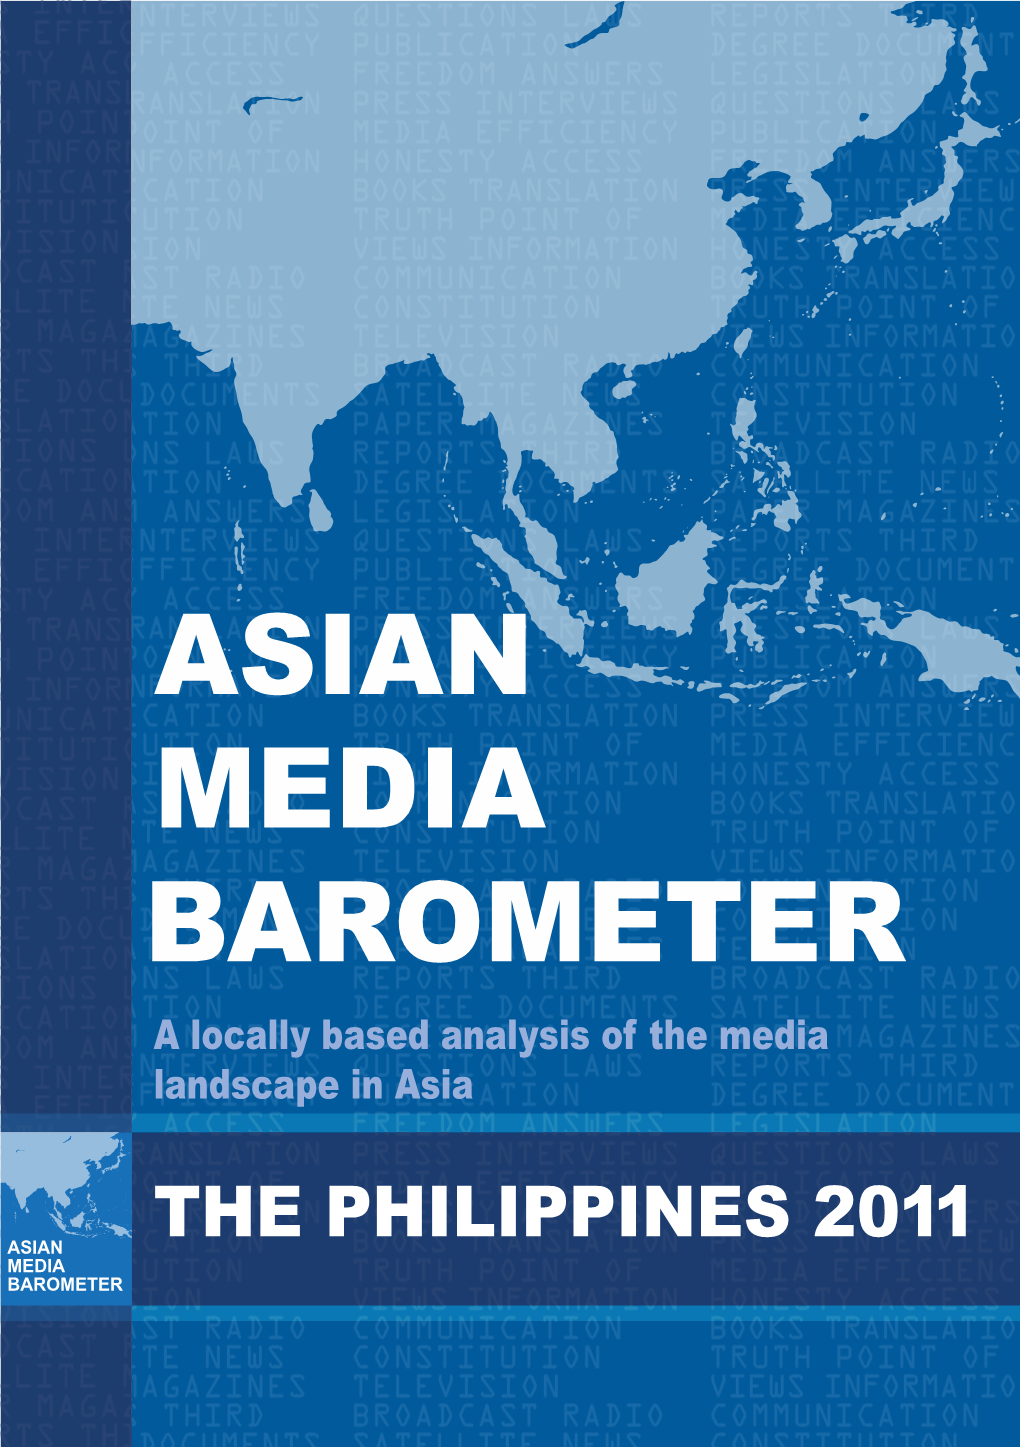 ASIAN MEDIA BAROMETER a Locally Based Analysis of the Media Landscape in Asia